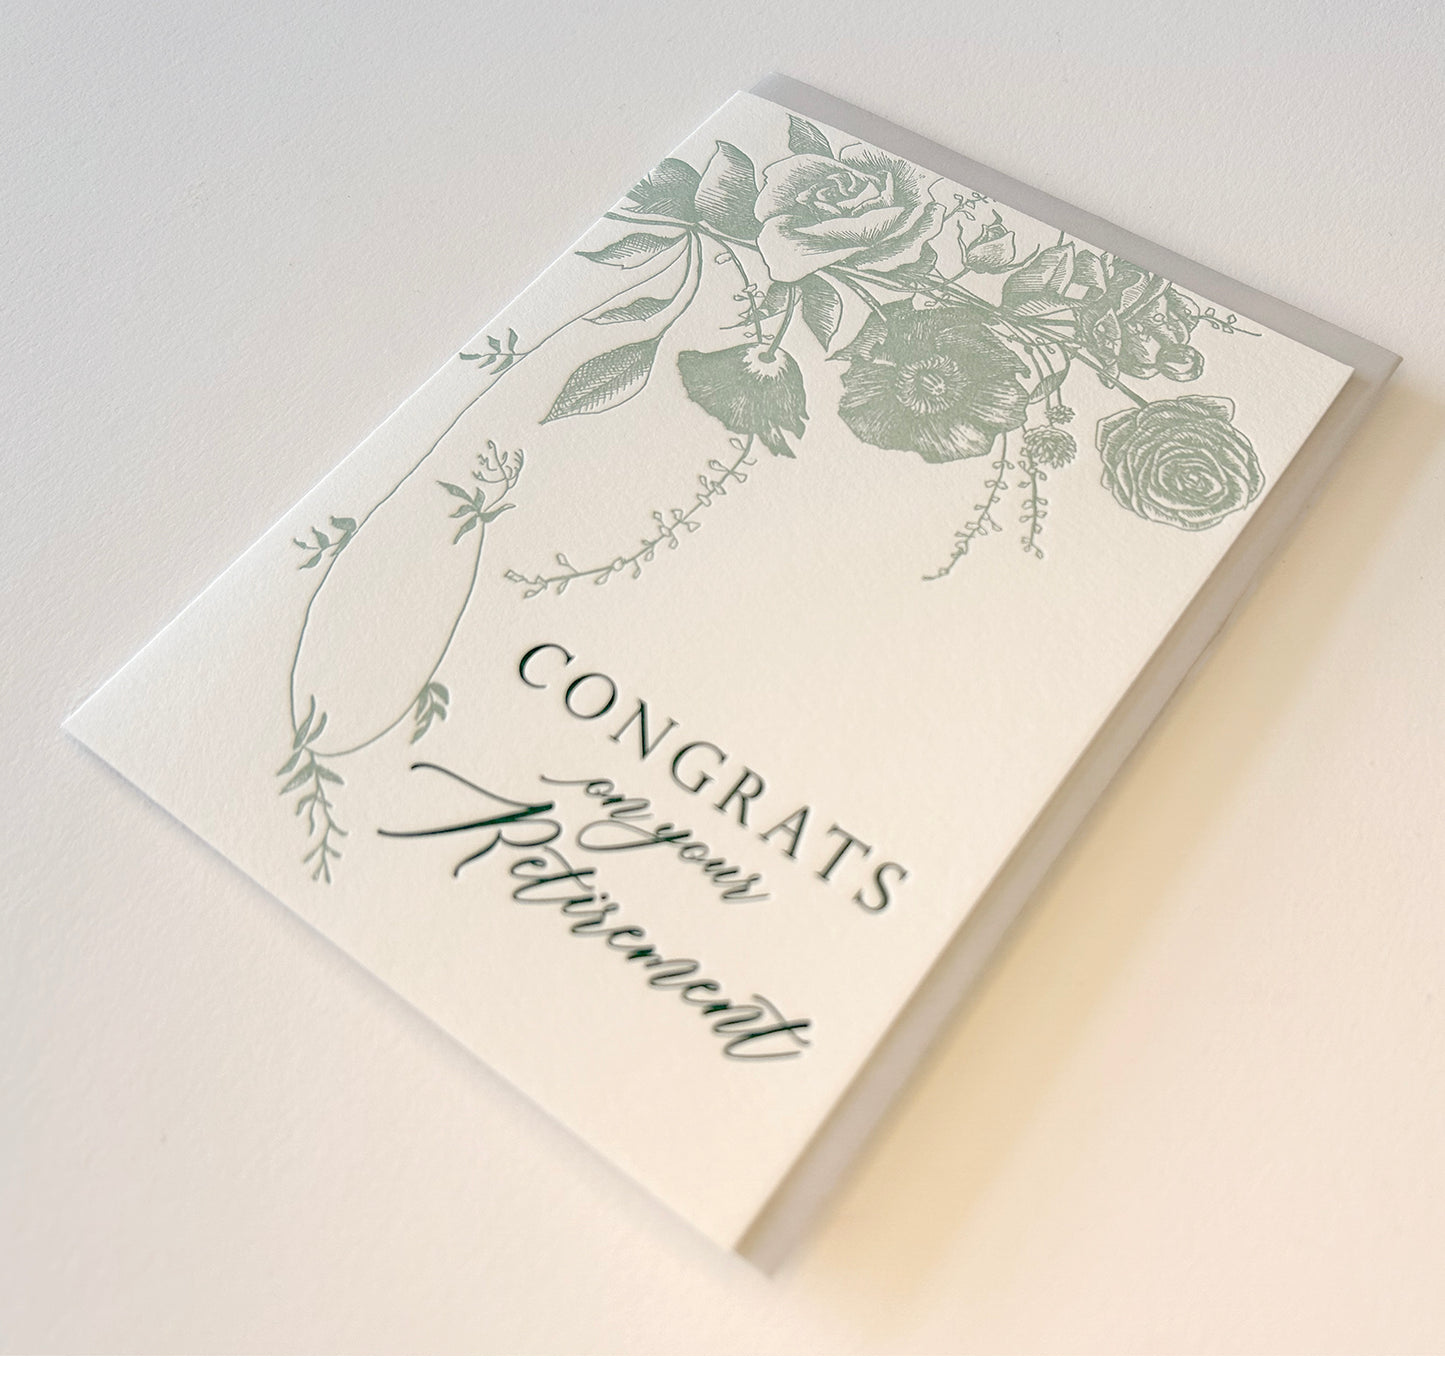 Letterpress retirement card with florals that says " Congrats on Your Retirement" by Rust Belt Love